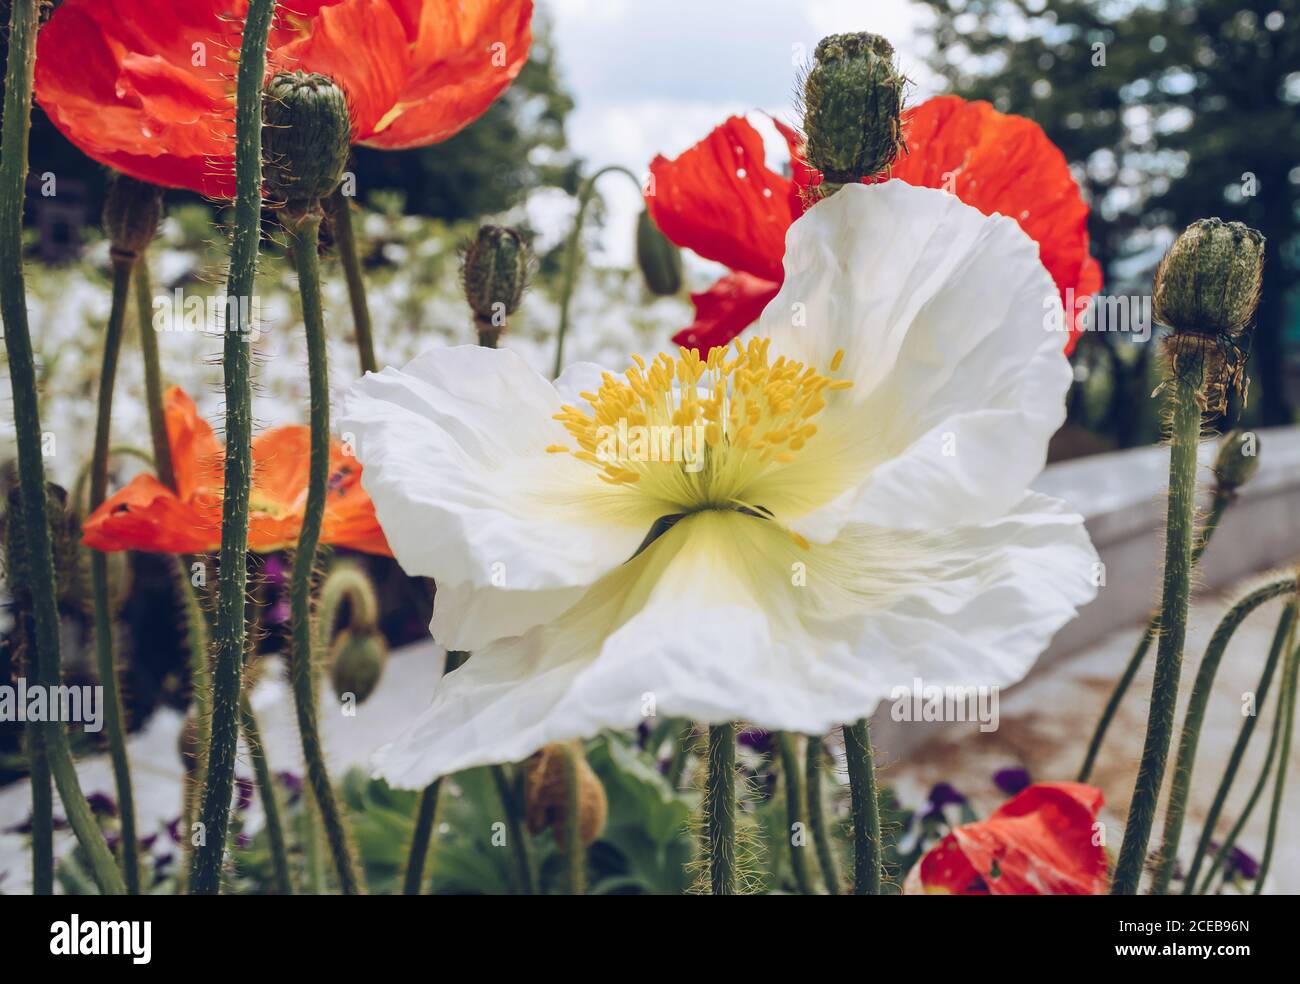 close up view of blooming poppies and other flowers on background Stock Photo